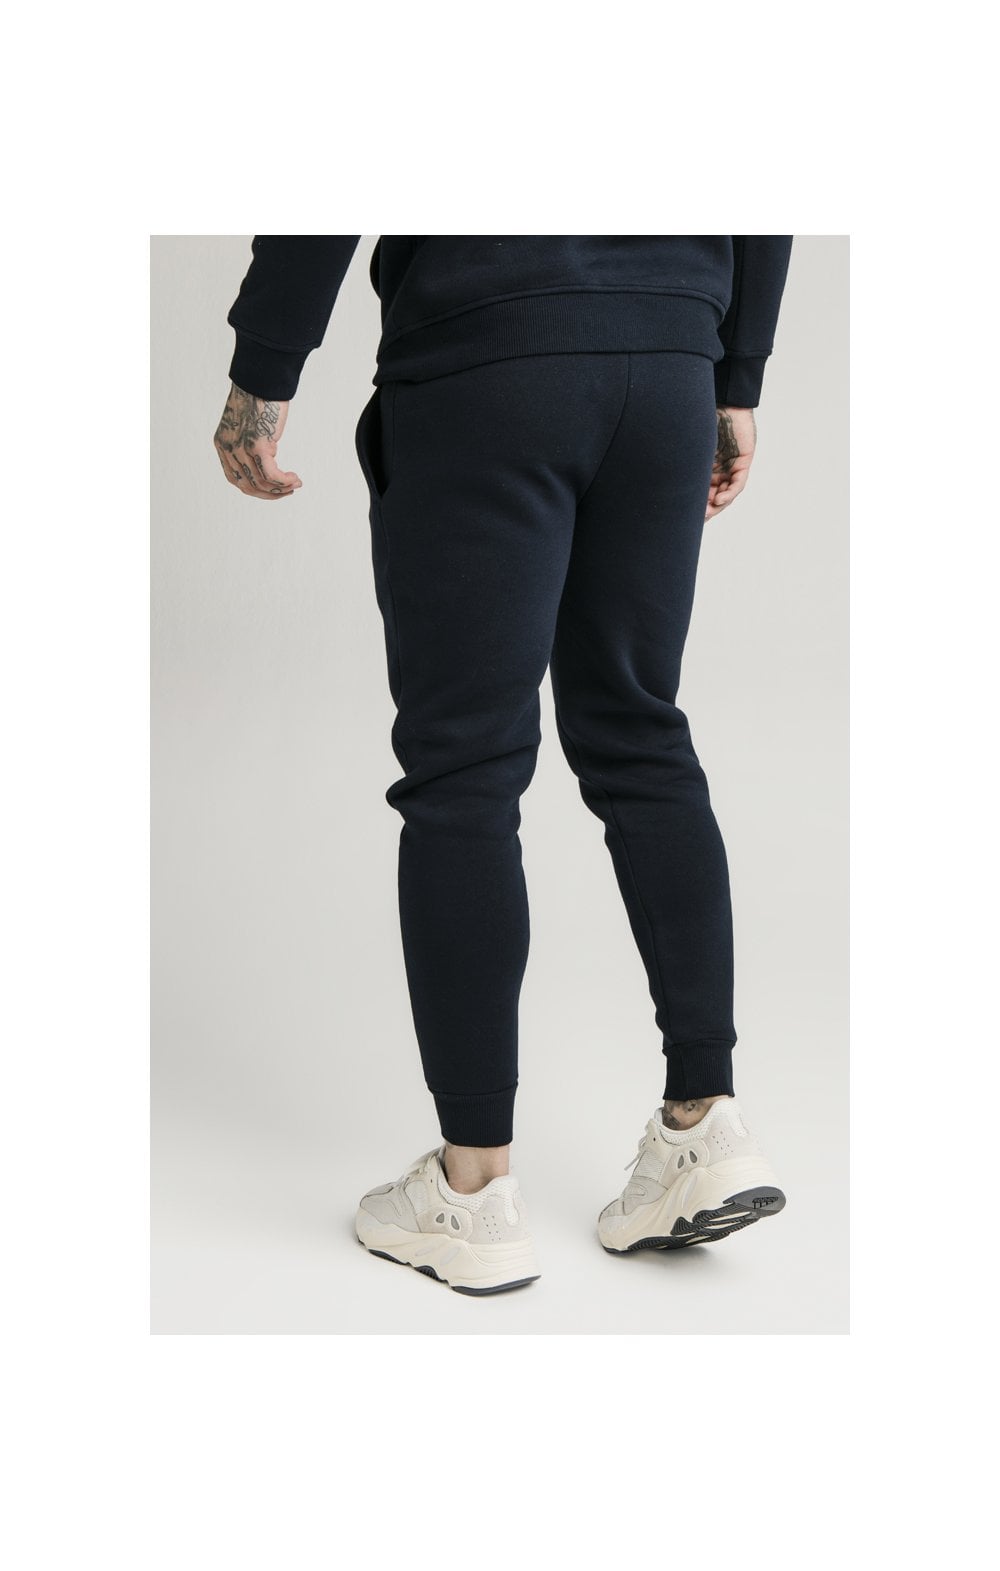 Navy Muscle Fit Jogger (3)